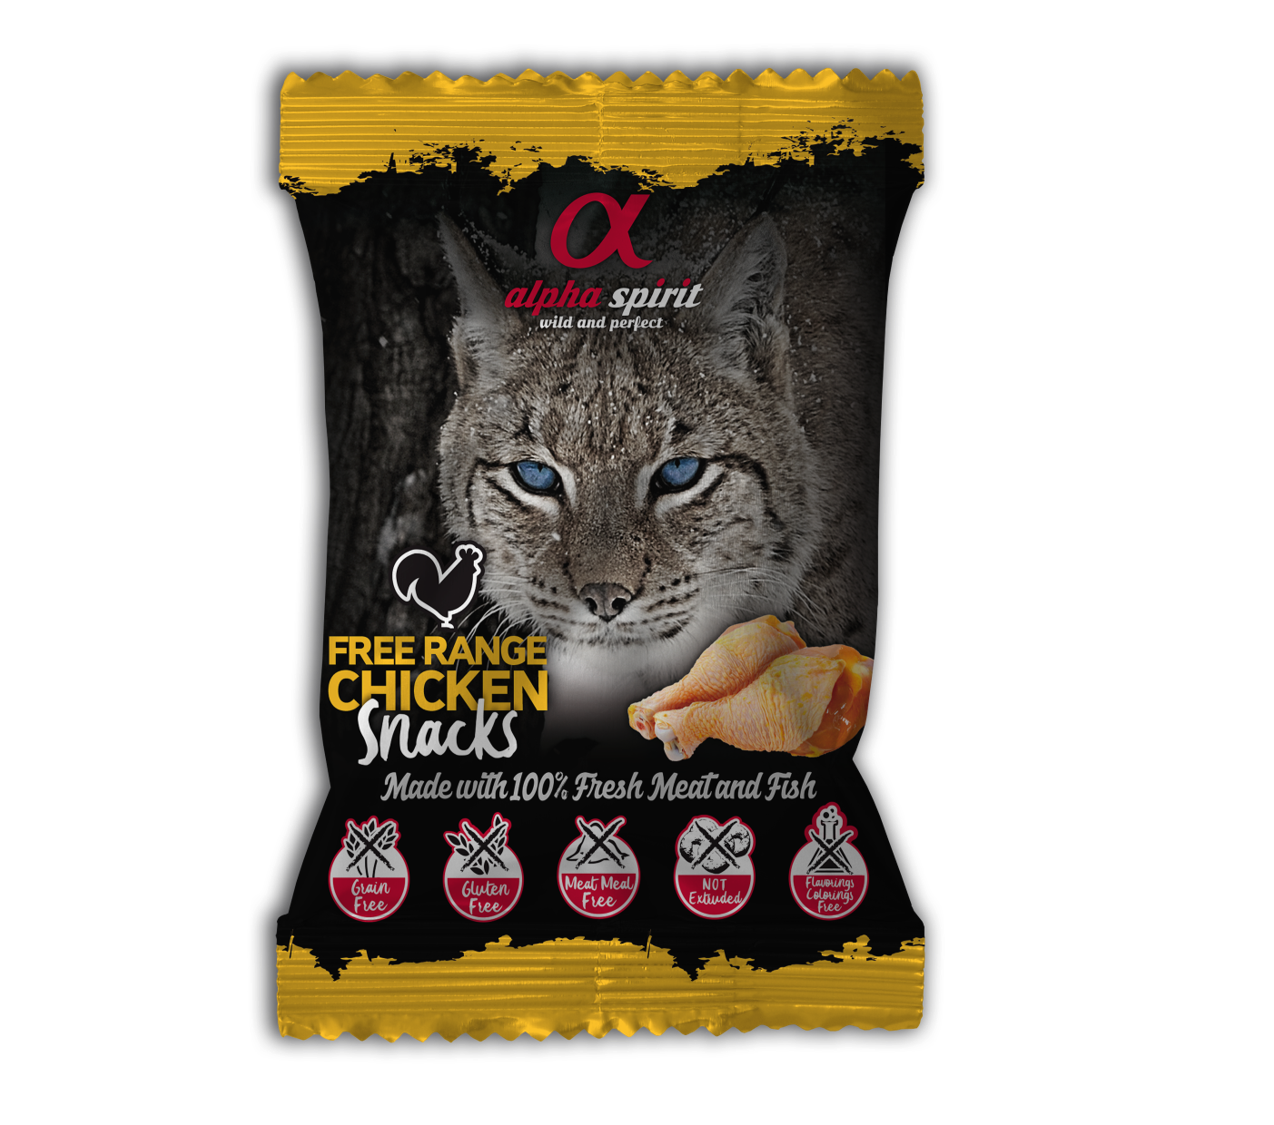 Poultry Snack for cats (50gr)